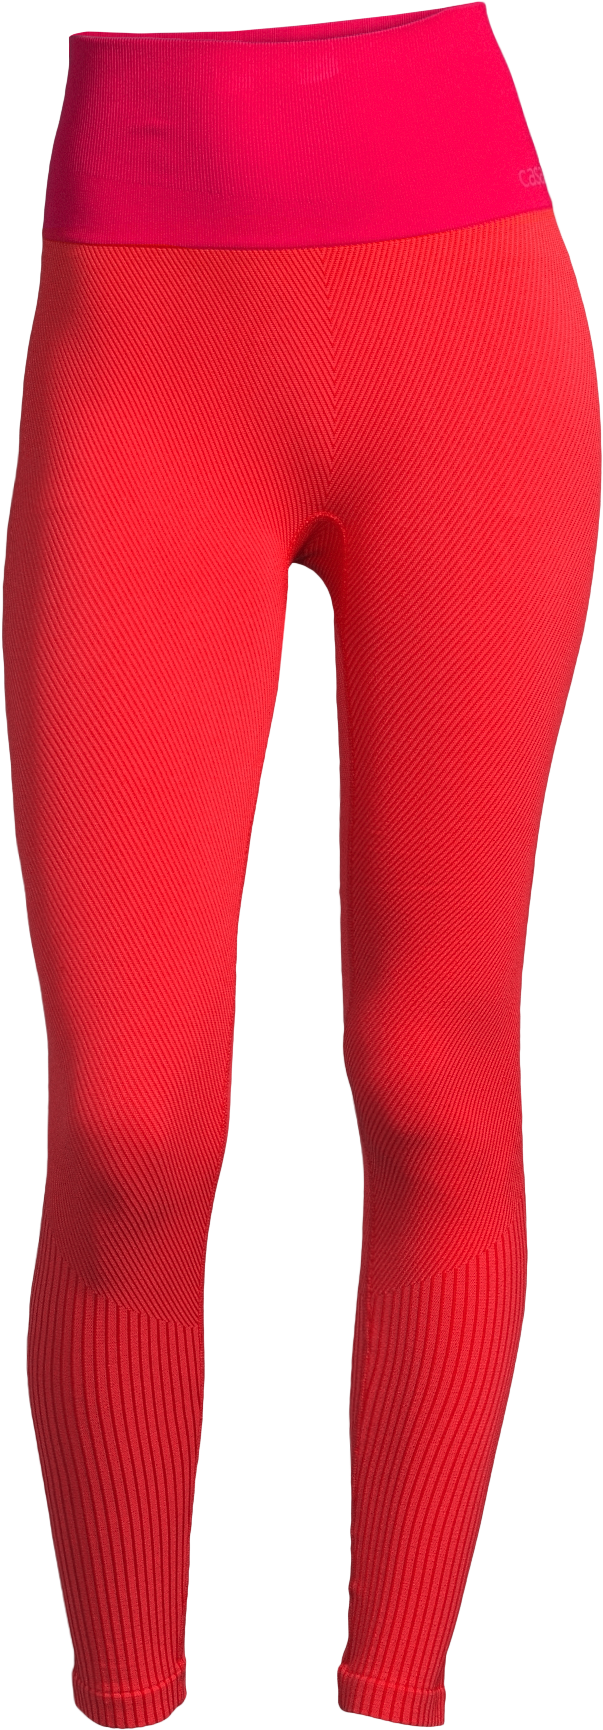 A Close Up Of A Pair Of Red Tights